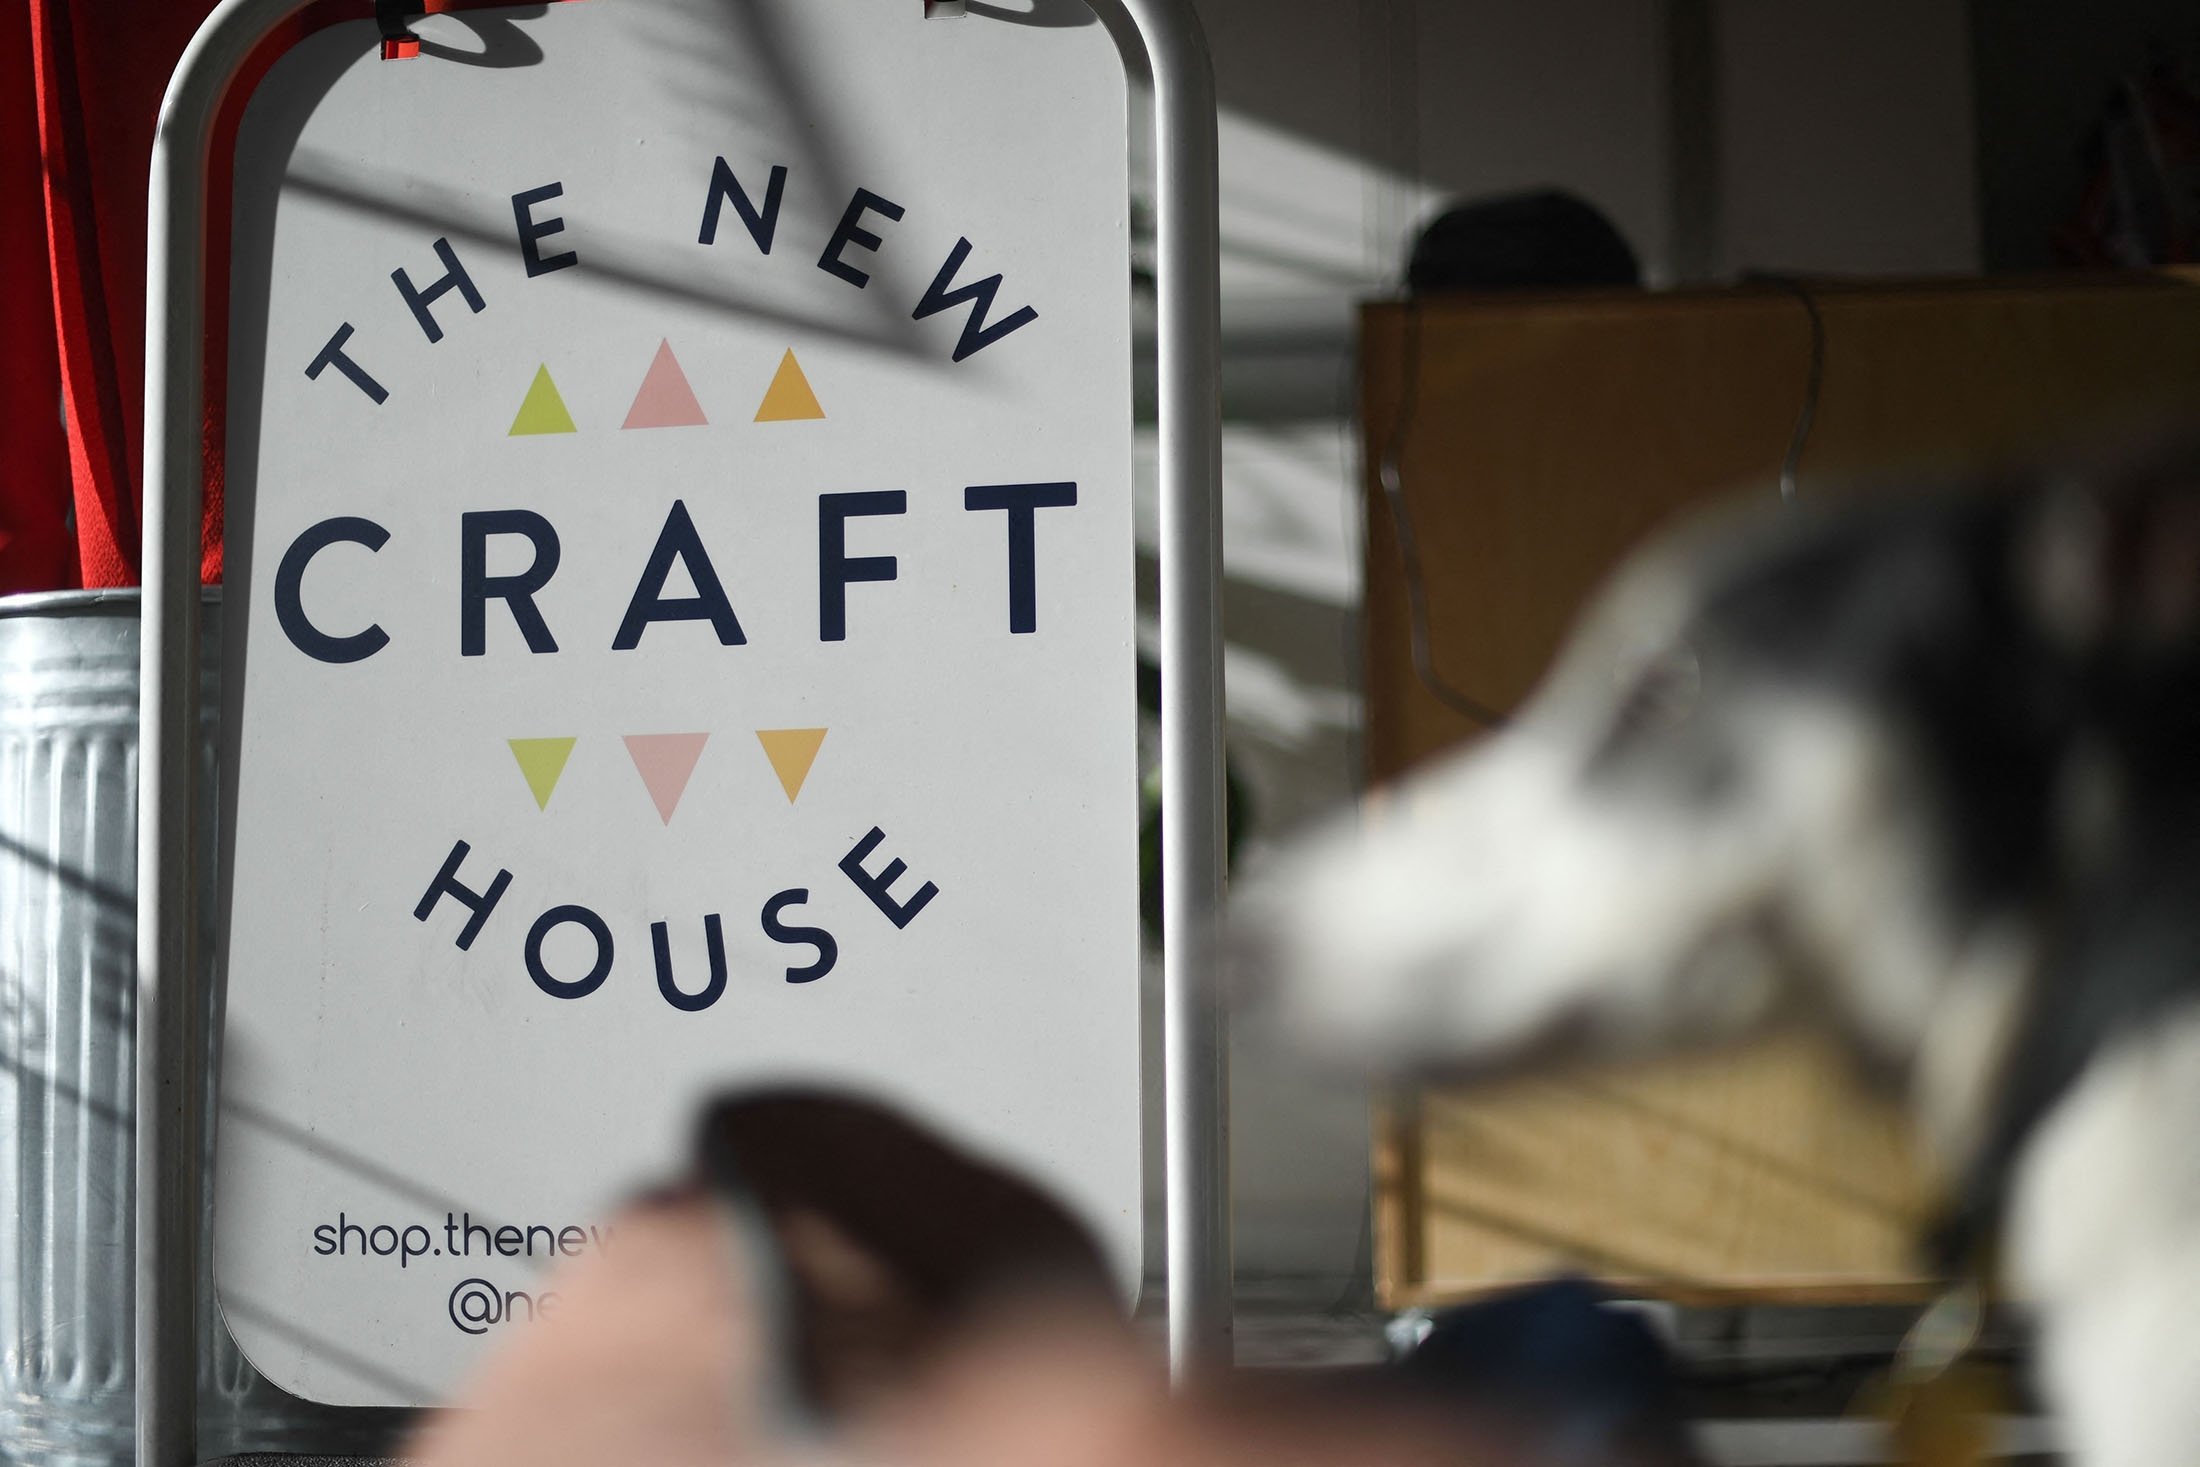 The shop sign displayed at the New Craft House, a sewing workshop studio and designer deadstock fabric shop, in Hackney, East London, U.K., Feb. 11, 2022. (AFP Photo)